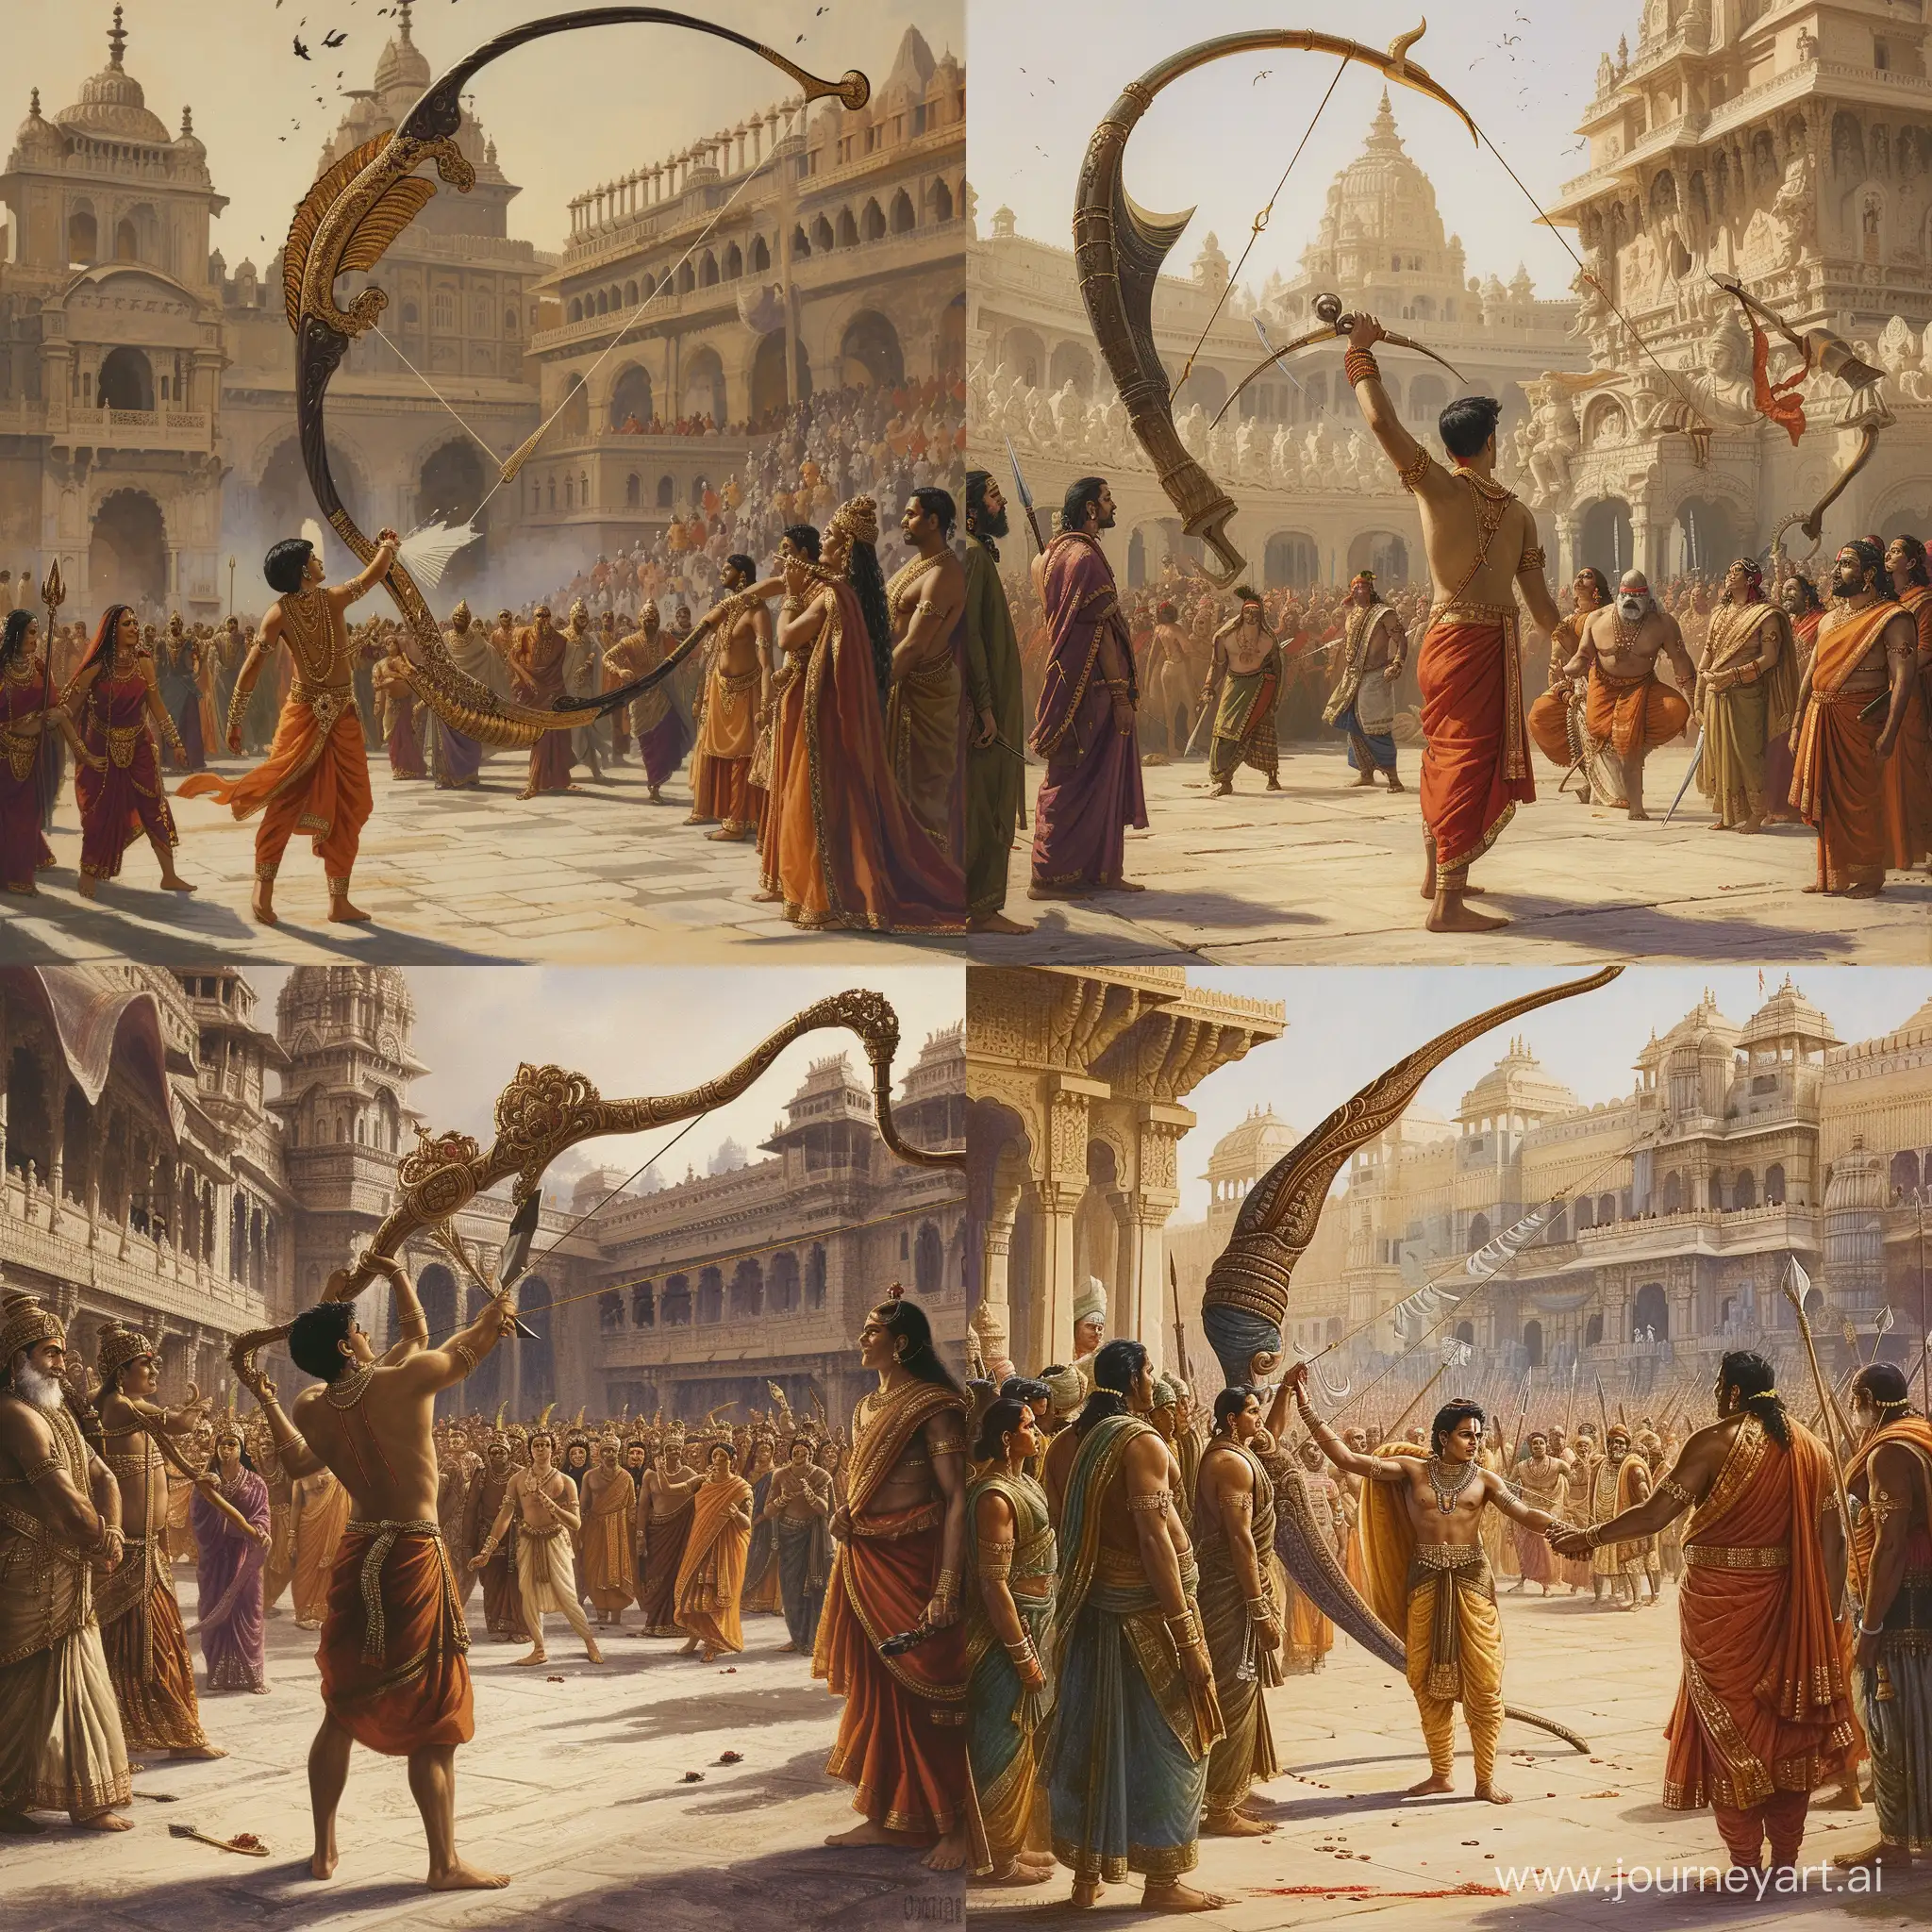 Lord-Rama-Breaking-Lord-Shivas-Bow-in-Grand-Ancient-Indian-Palace